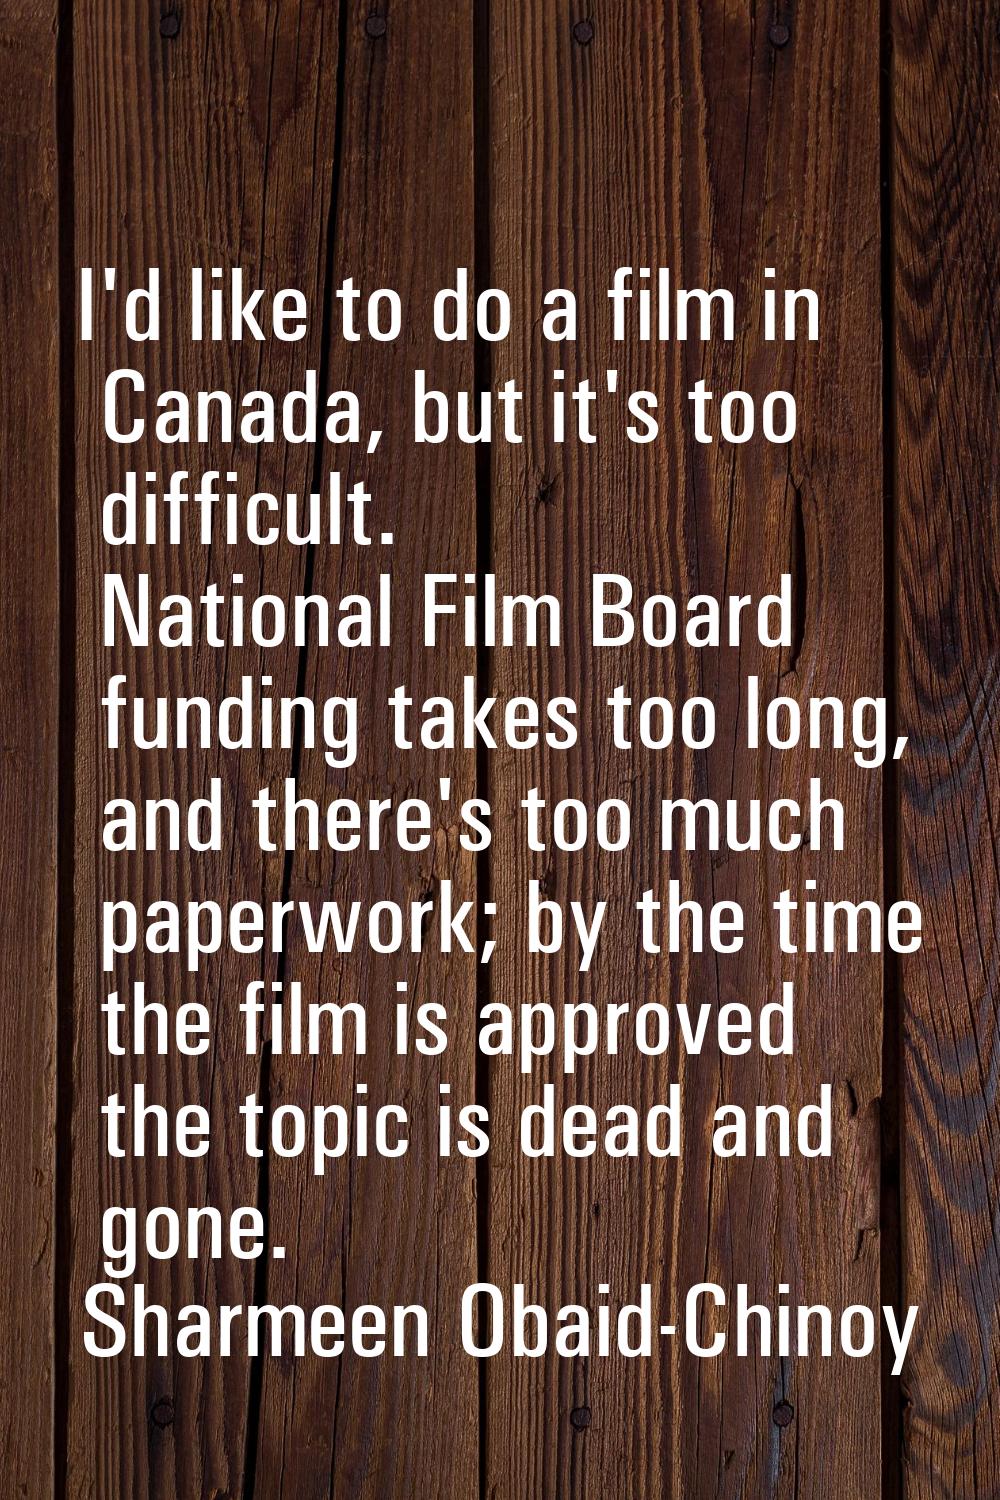 I'd like to do a film in Canada, but it's too difficult. National Film Board funding takes too long